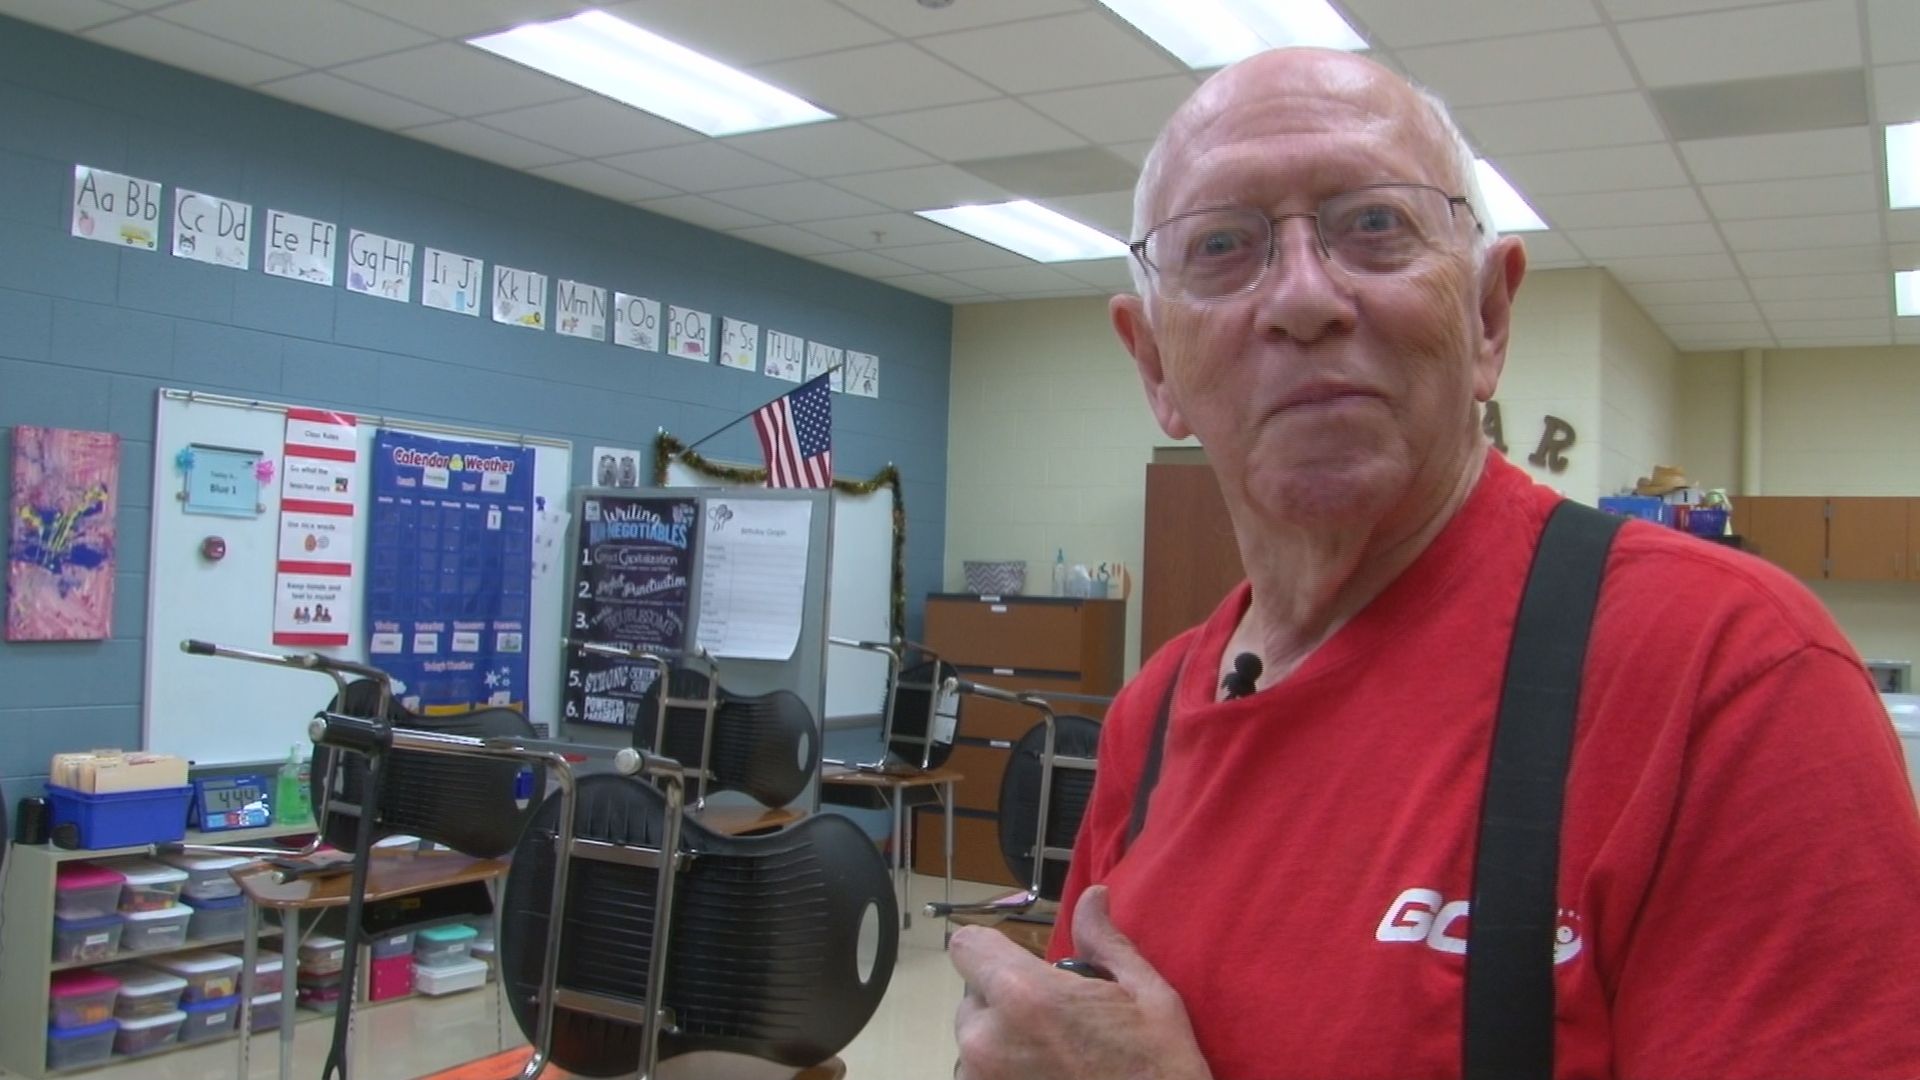 wbir.com | Local janitor used to work for NASA, recovering from stroke1920 x 1080